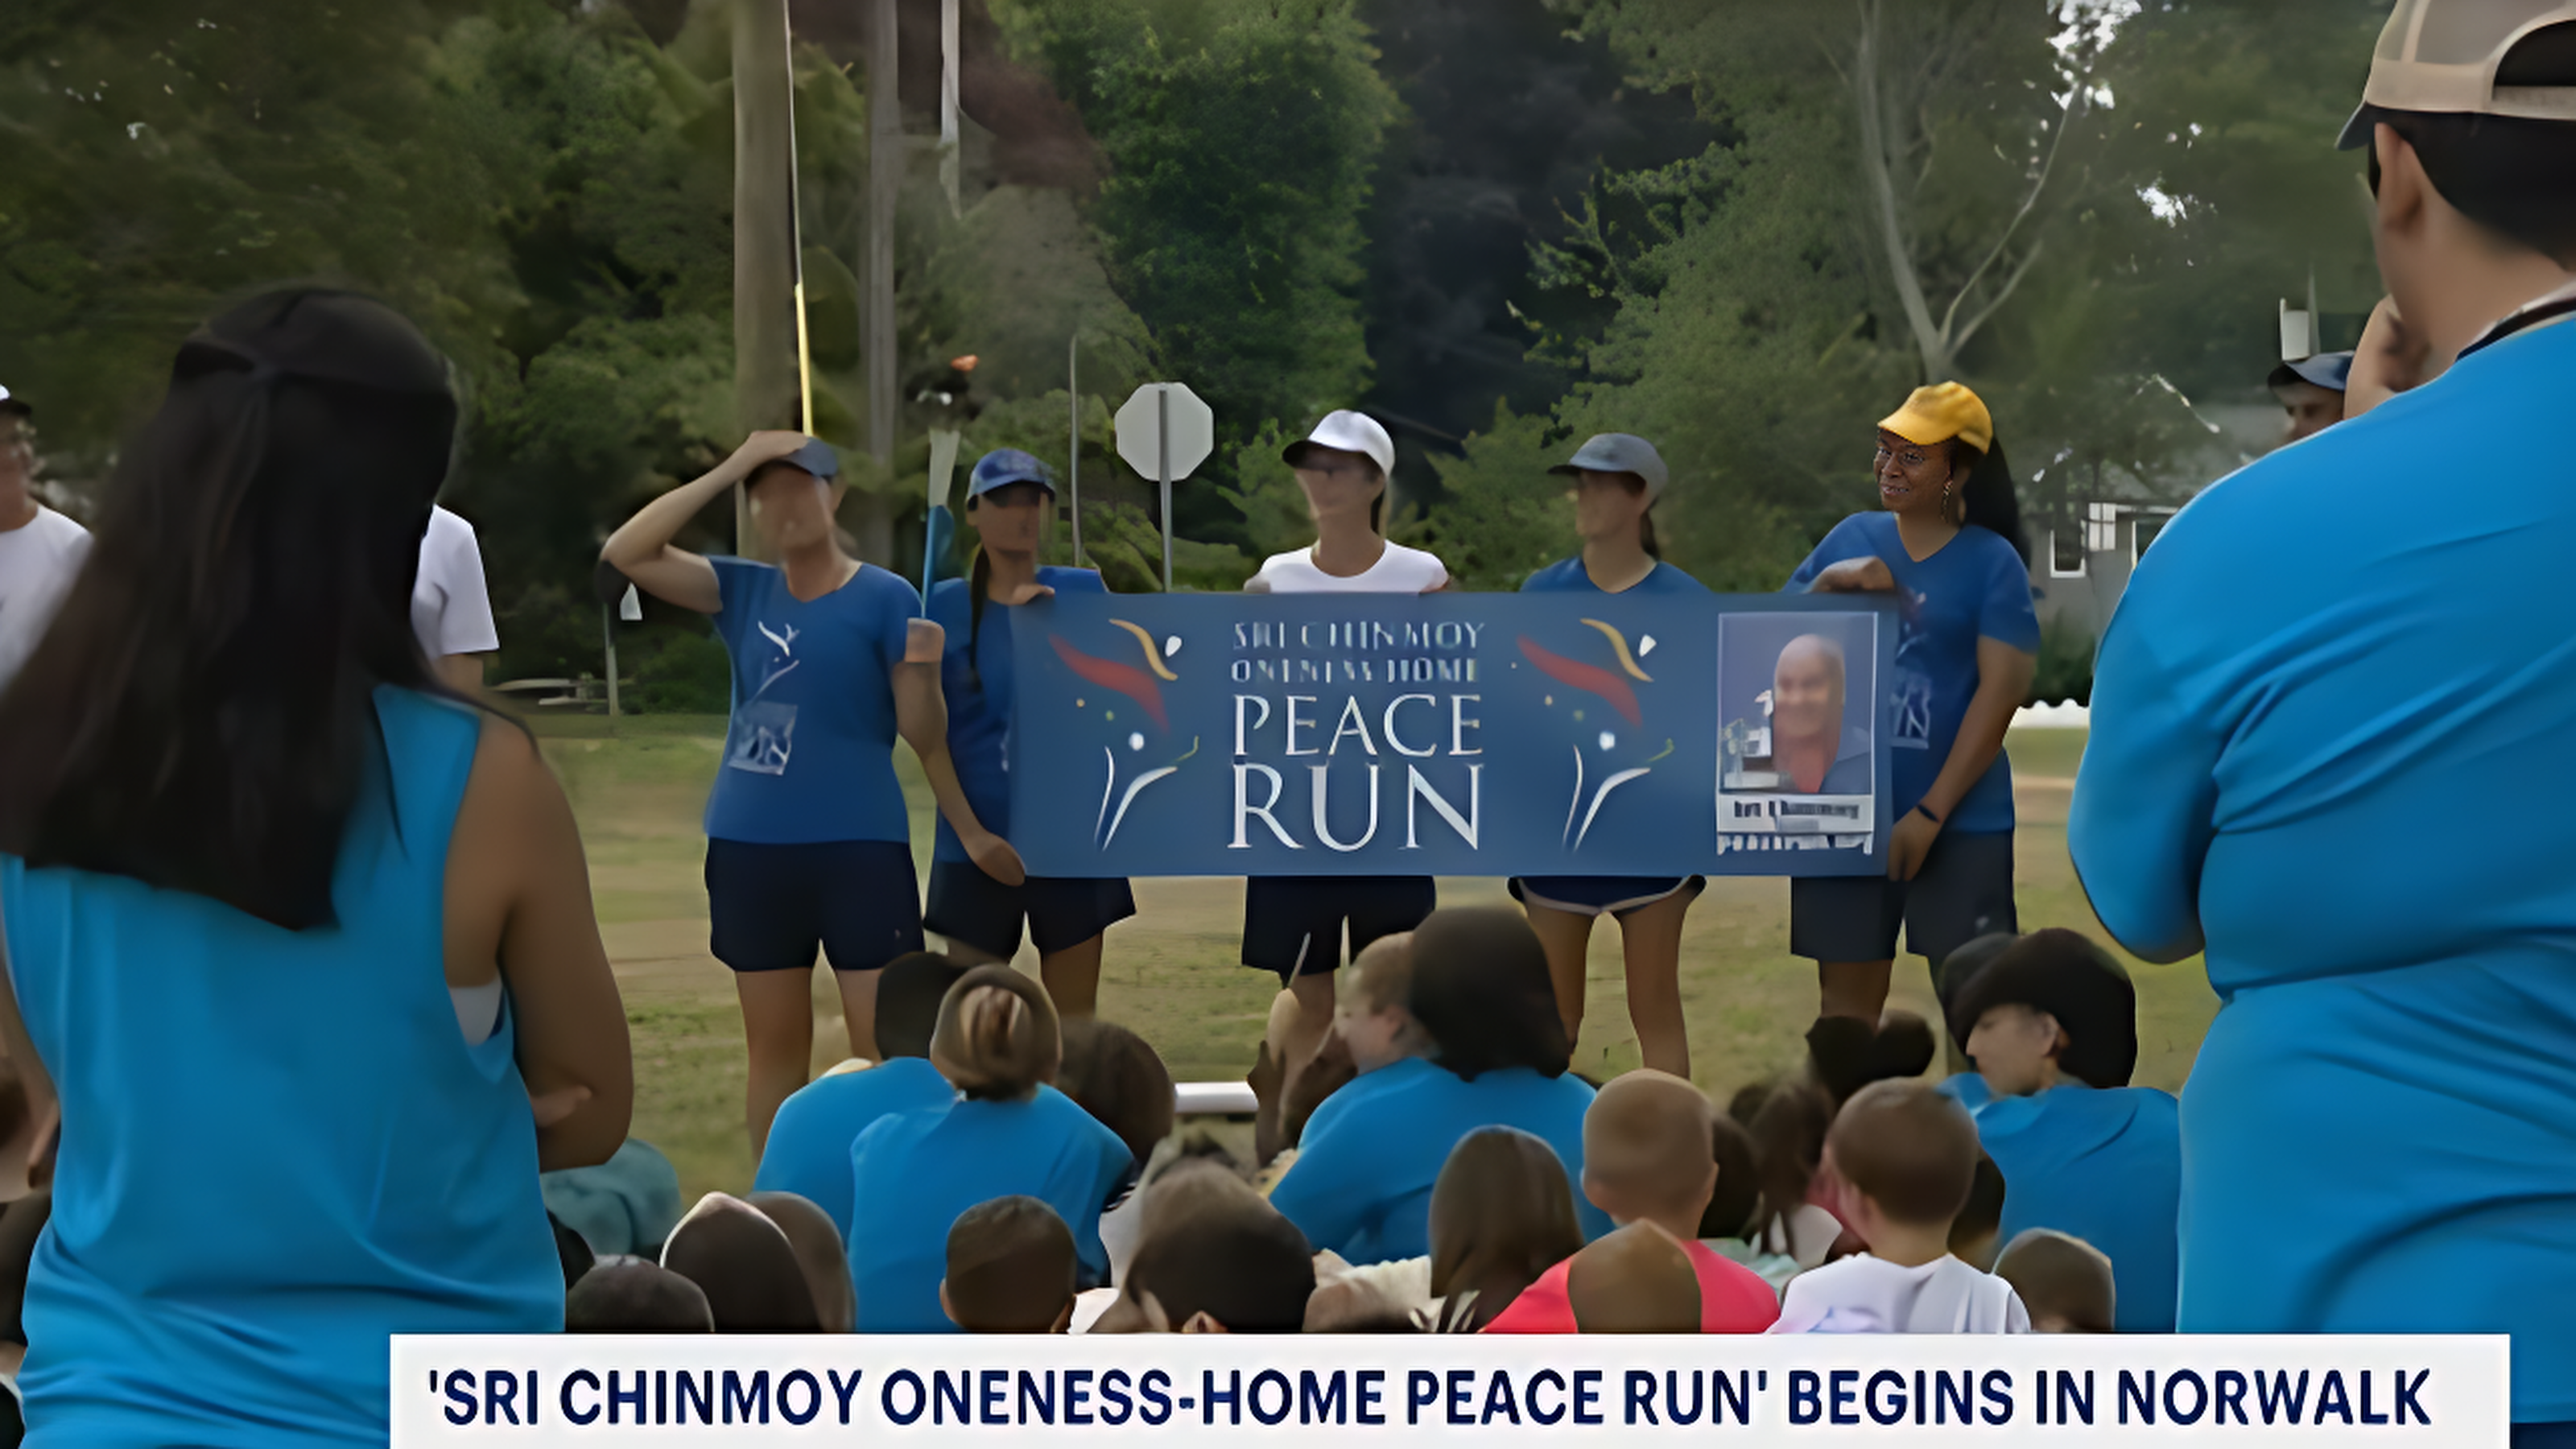 Runners Unite for the Sri Chinmoy Oneness-Home Peace Run in Norwalk, United States